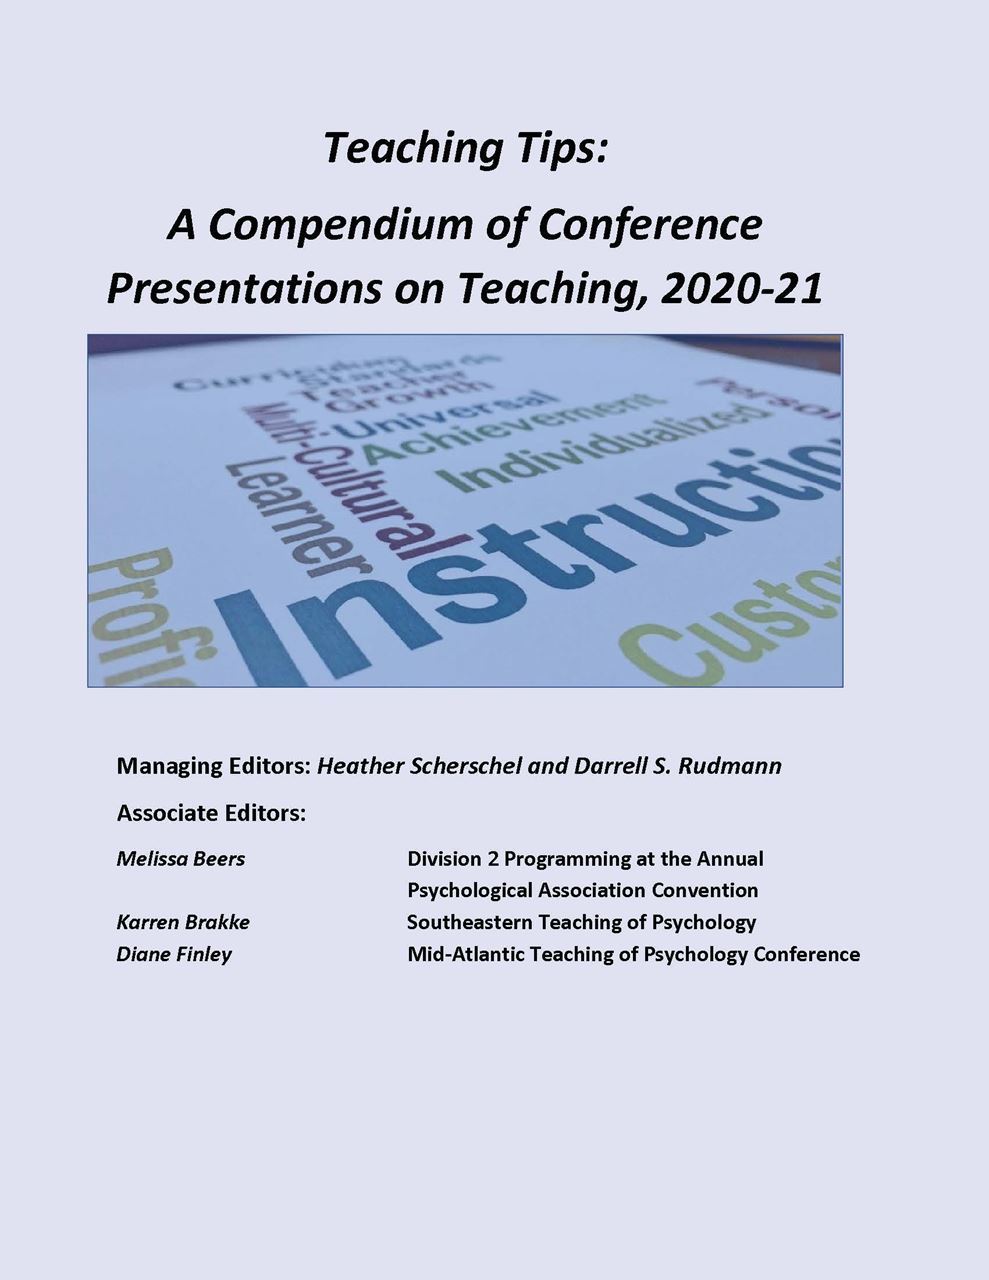 Teaching Tips: A Compendium of Conference Presentations on Teaching, 2020-2021